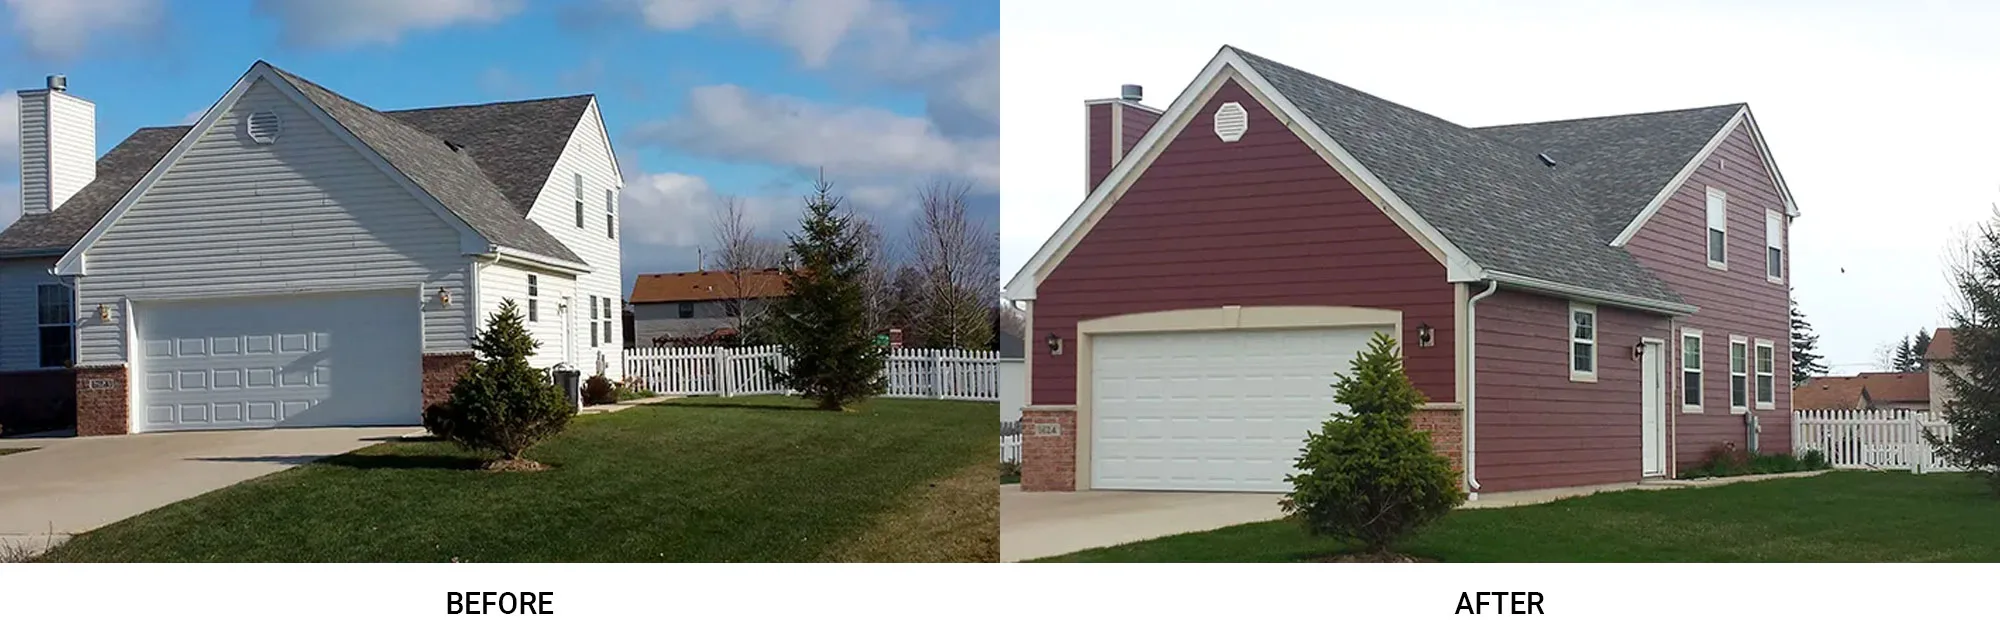 Siding Before After 3